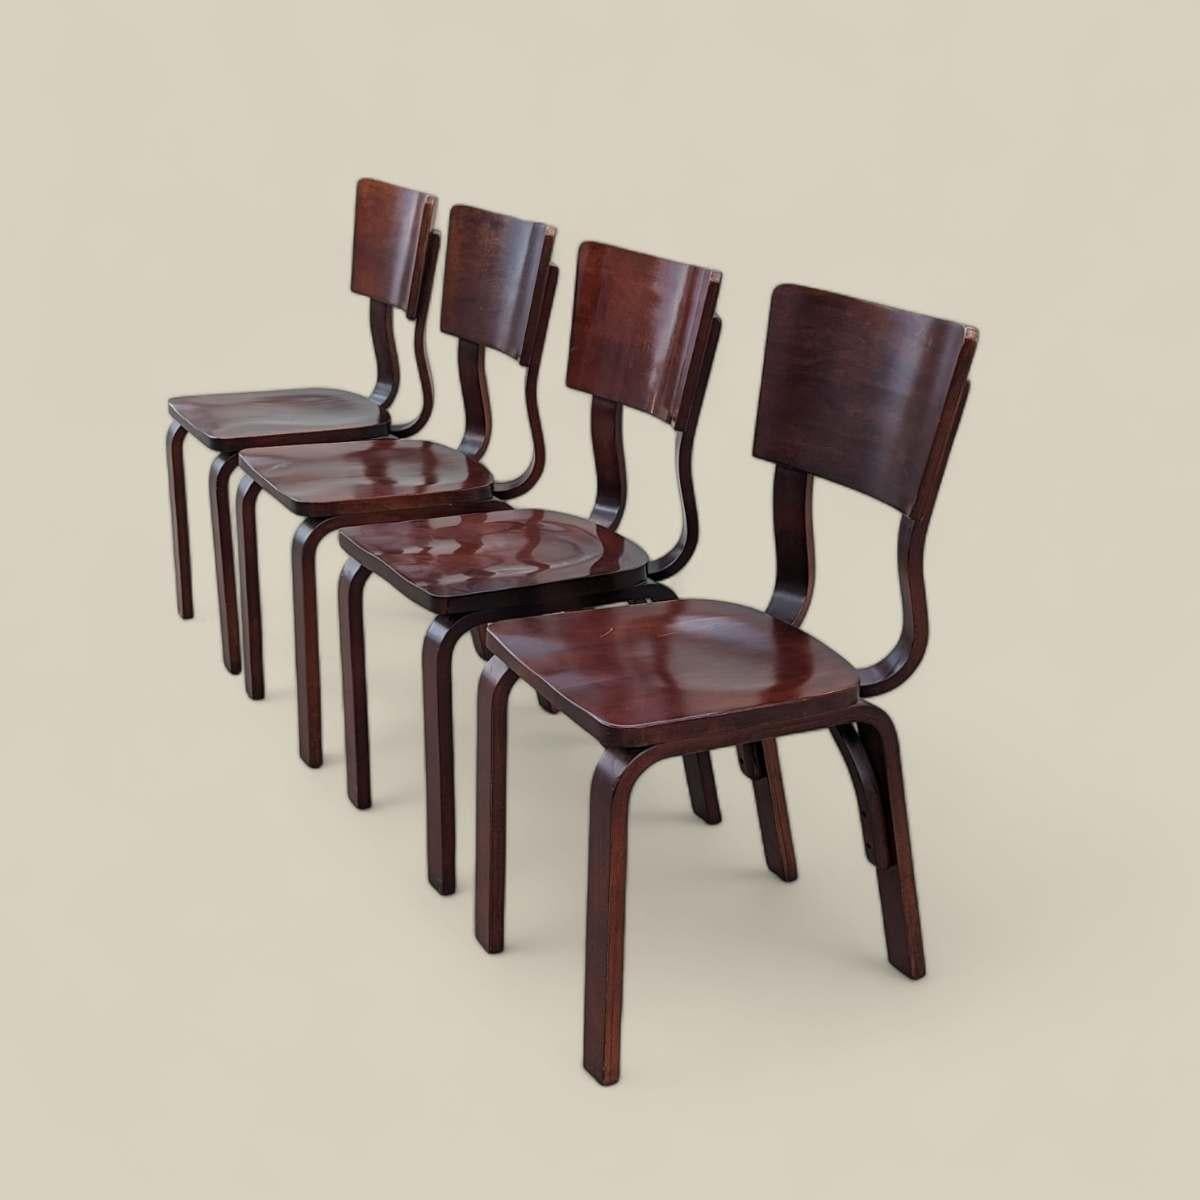 Vintage Thonet Bentwood Dining Chairs In Good Condition For Sale In Rancho Cucamonga, CA